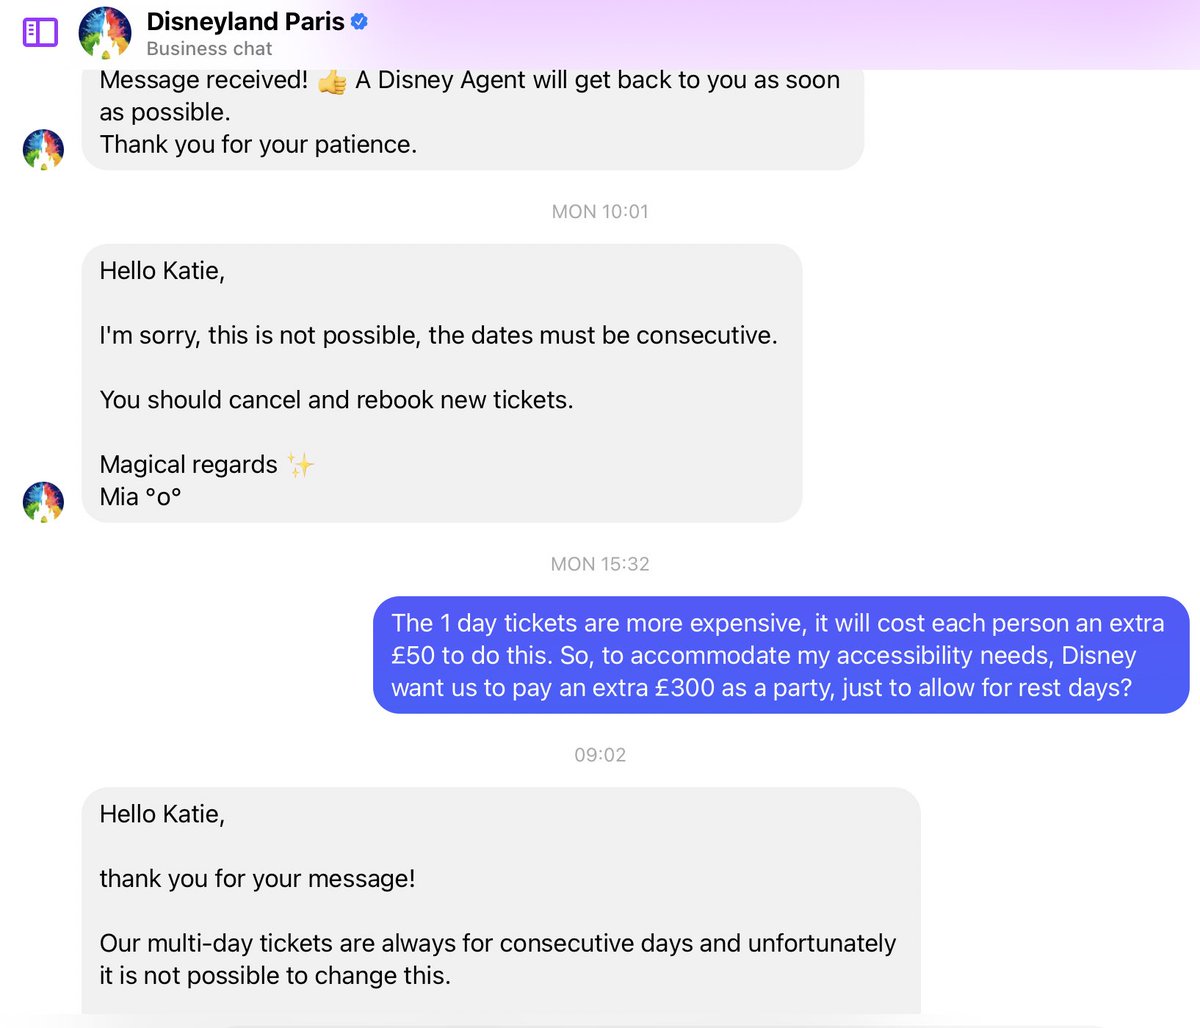 Shocking customer service from @DisneyParis_EN @DisneyParks. I have severe arthritis and am under a consultant for treatment. I can’t do 3 consecutive days on park, I need rest days. The response to this request is to cancel my 3 day ticket and book separate days, at extra cost.